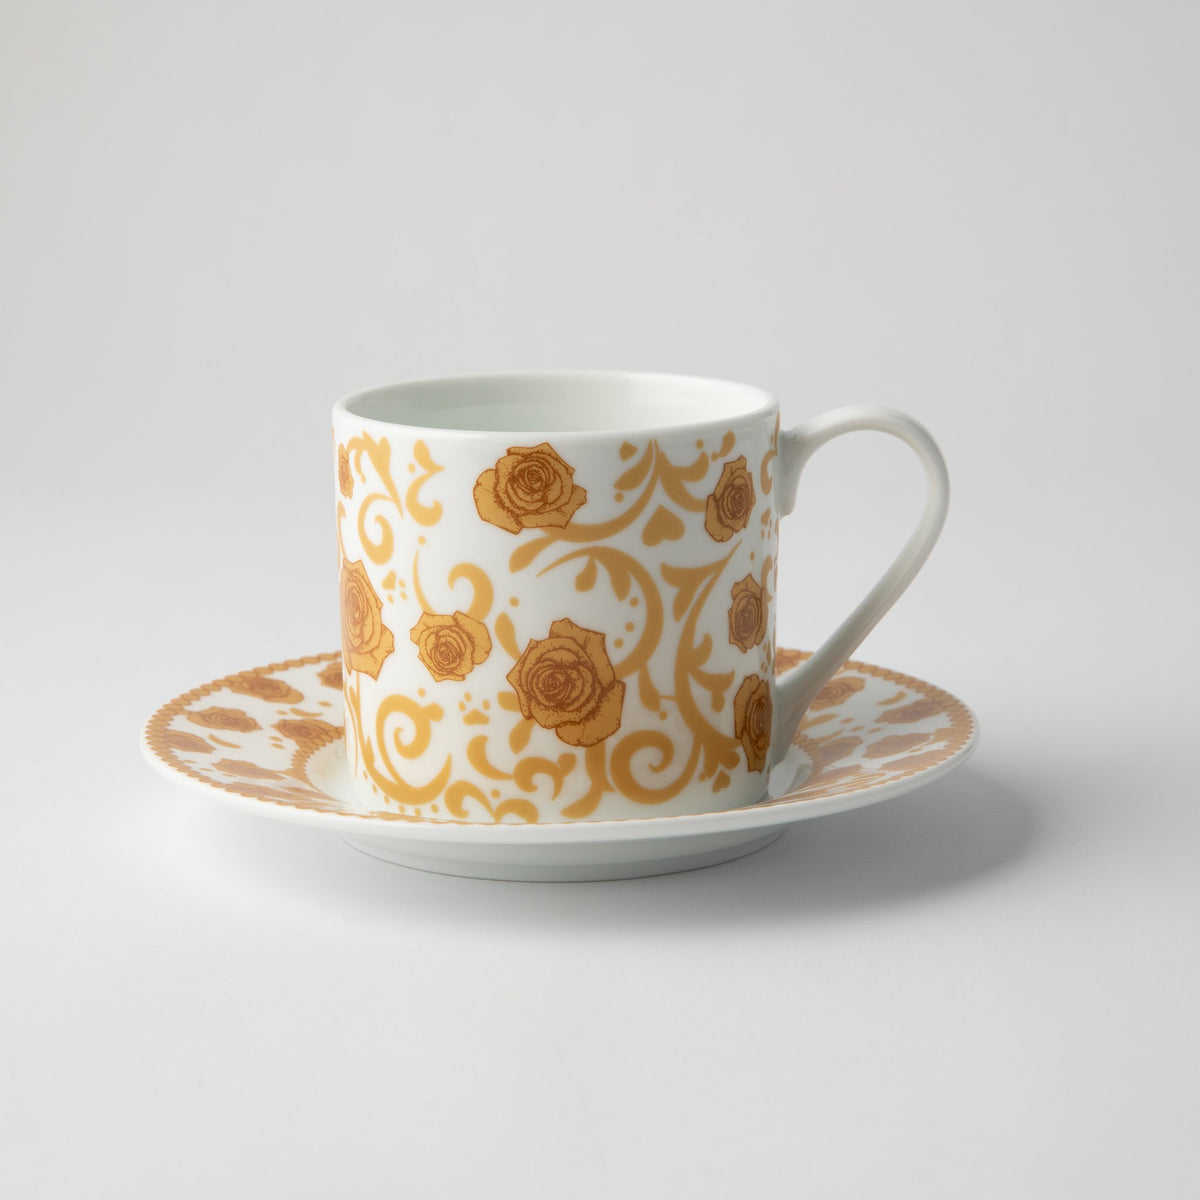 JENNA CLIFFORD - Mica Gold Cappuccino Cup & Saucer Gift Box Set of 2